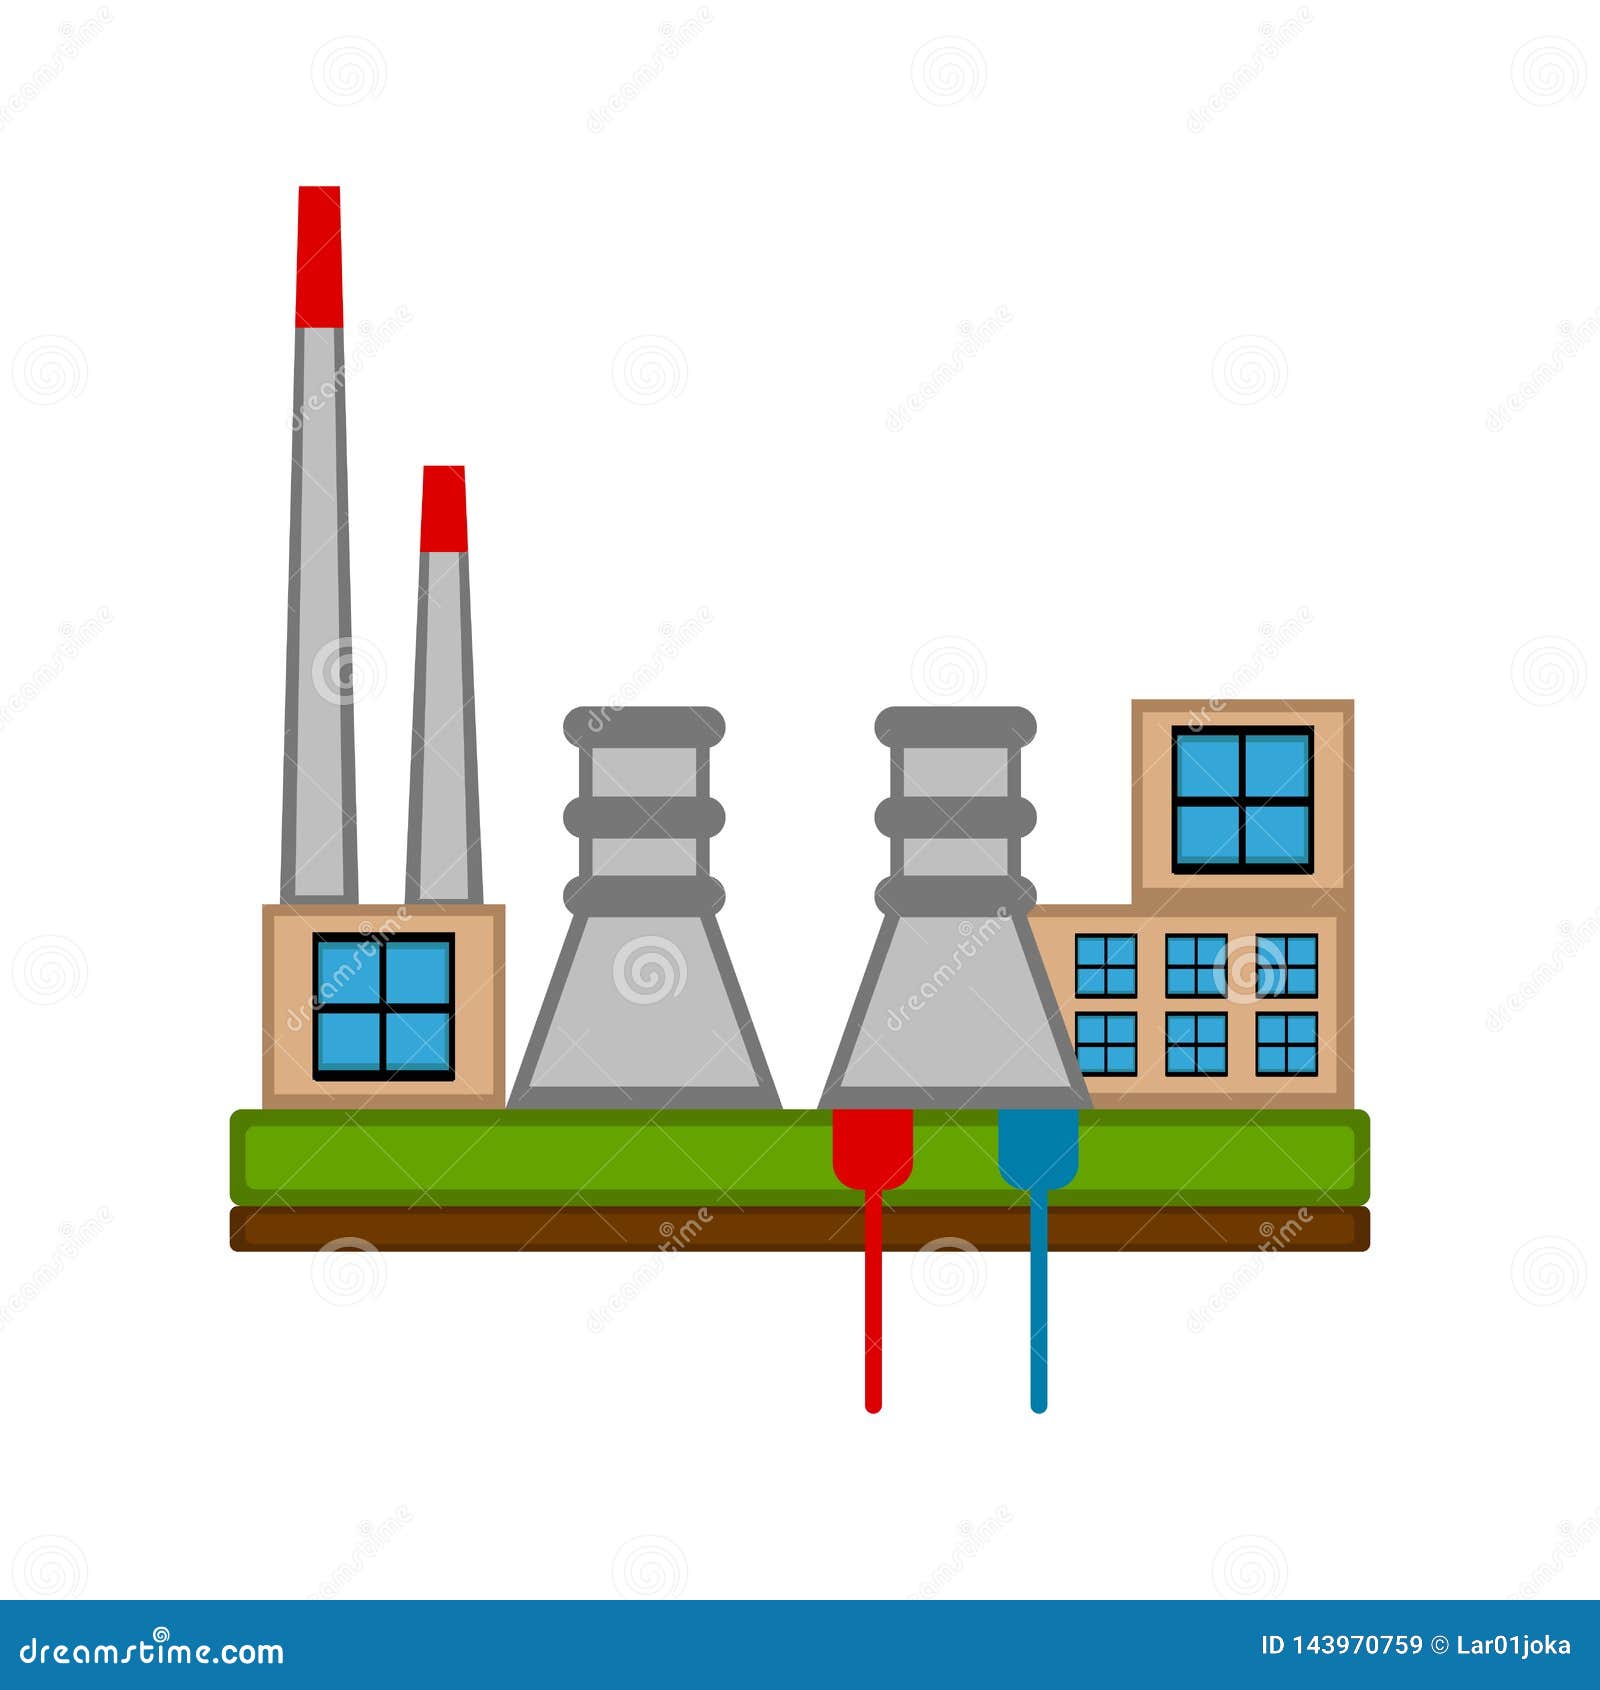 Coal power plant stock vector. Illustration of fuel - 143970759